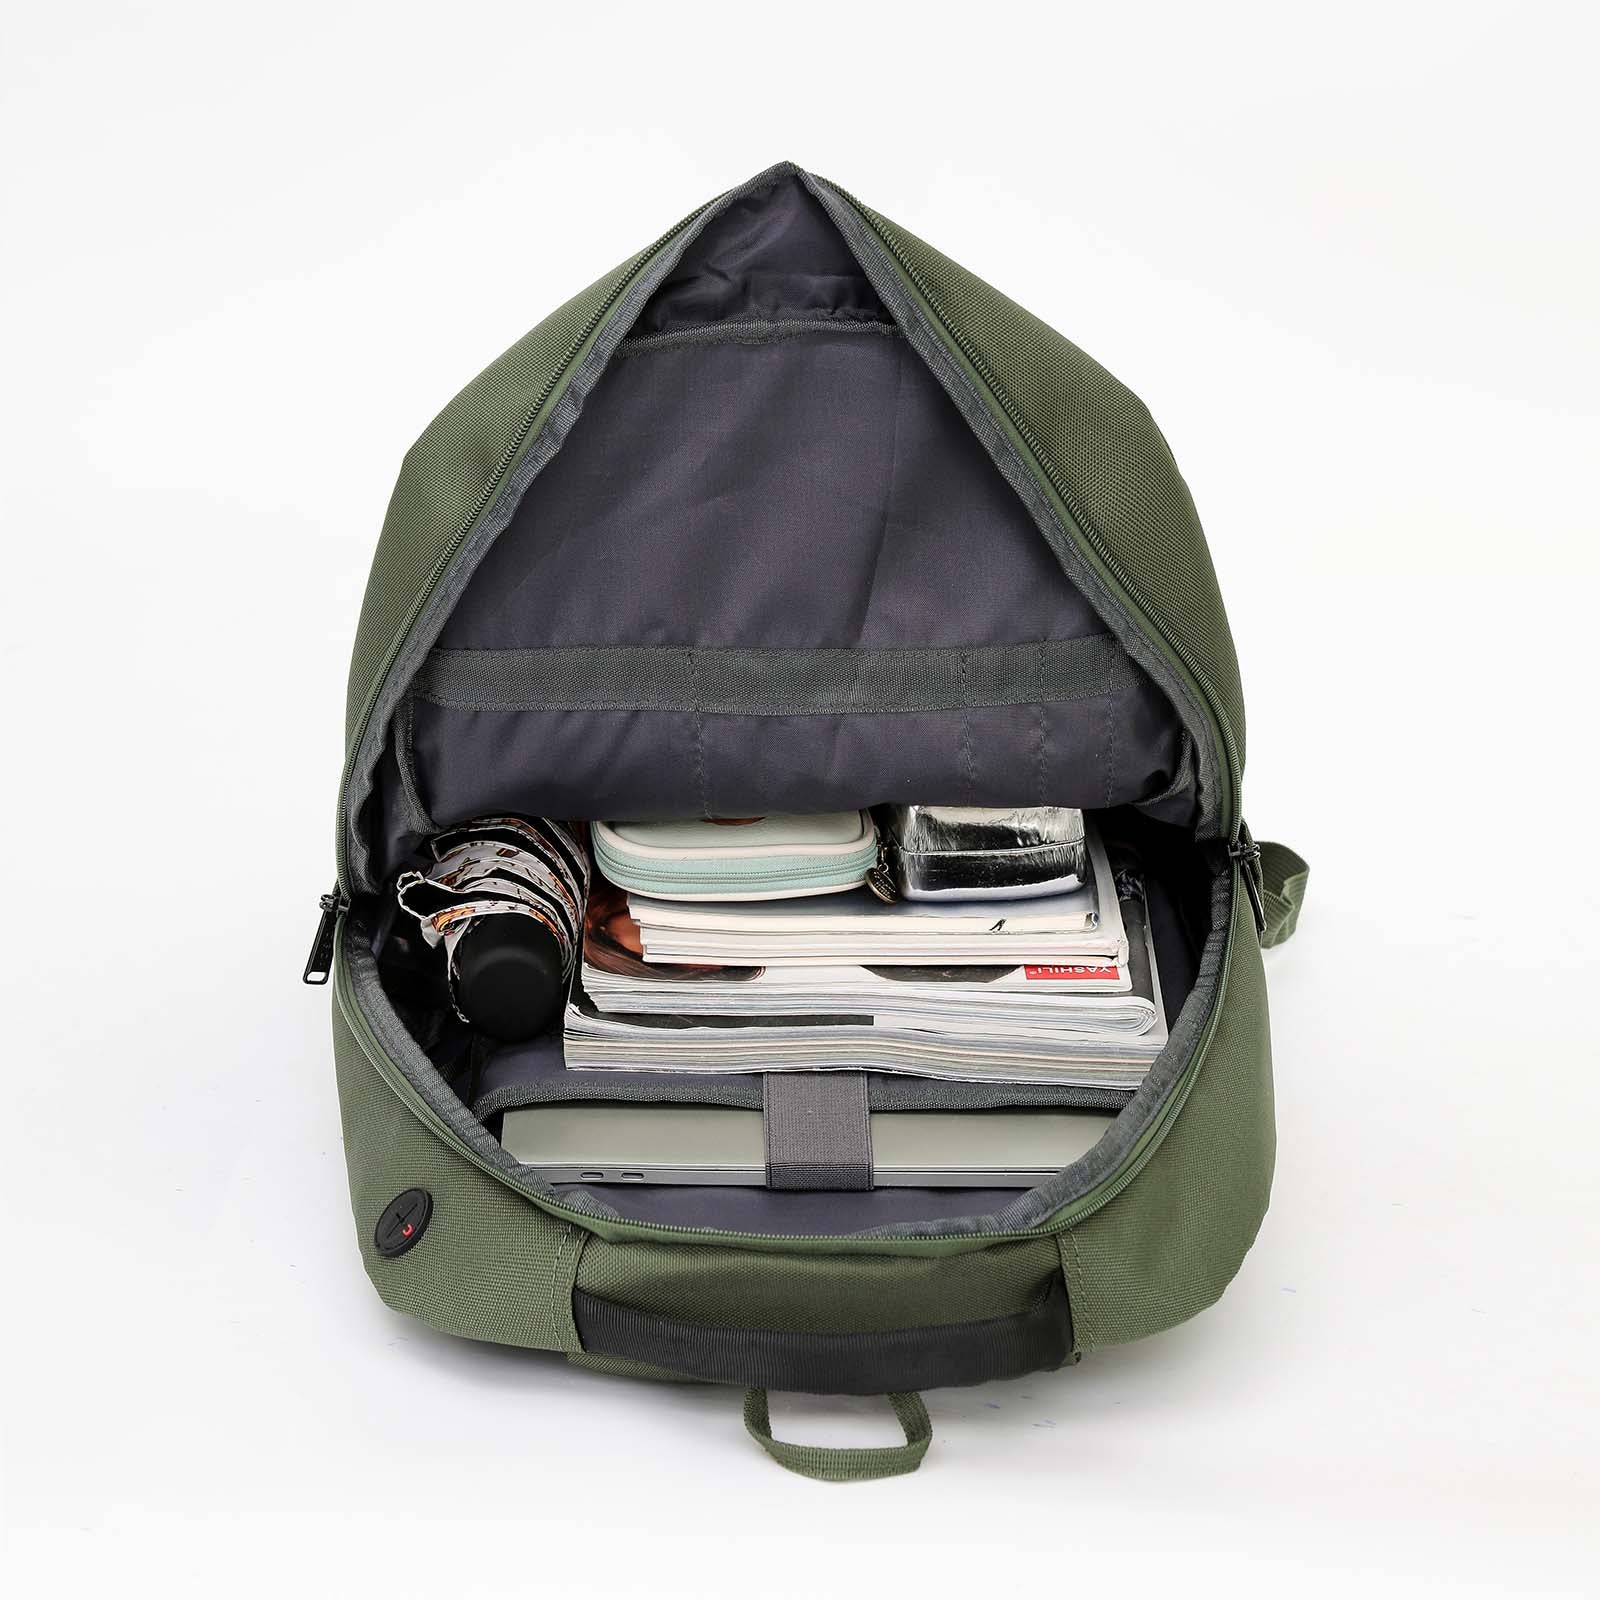 tosca-laptop-compartment-backpack-35l-khaki-opening